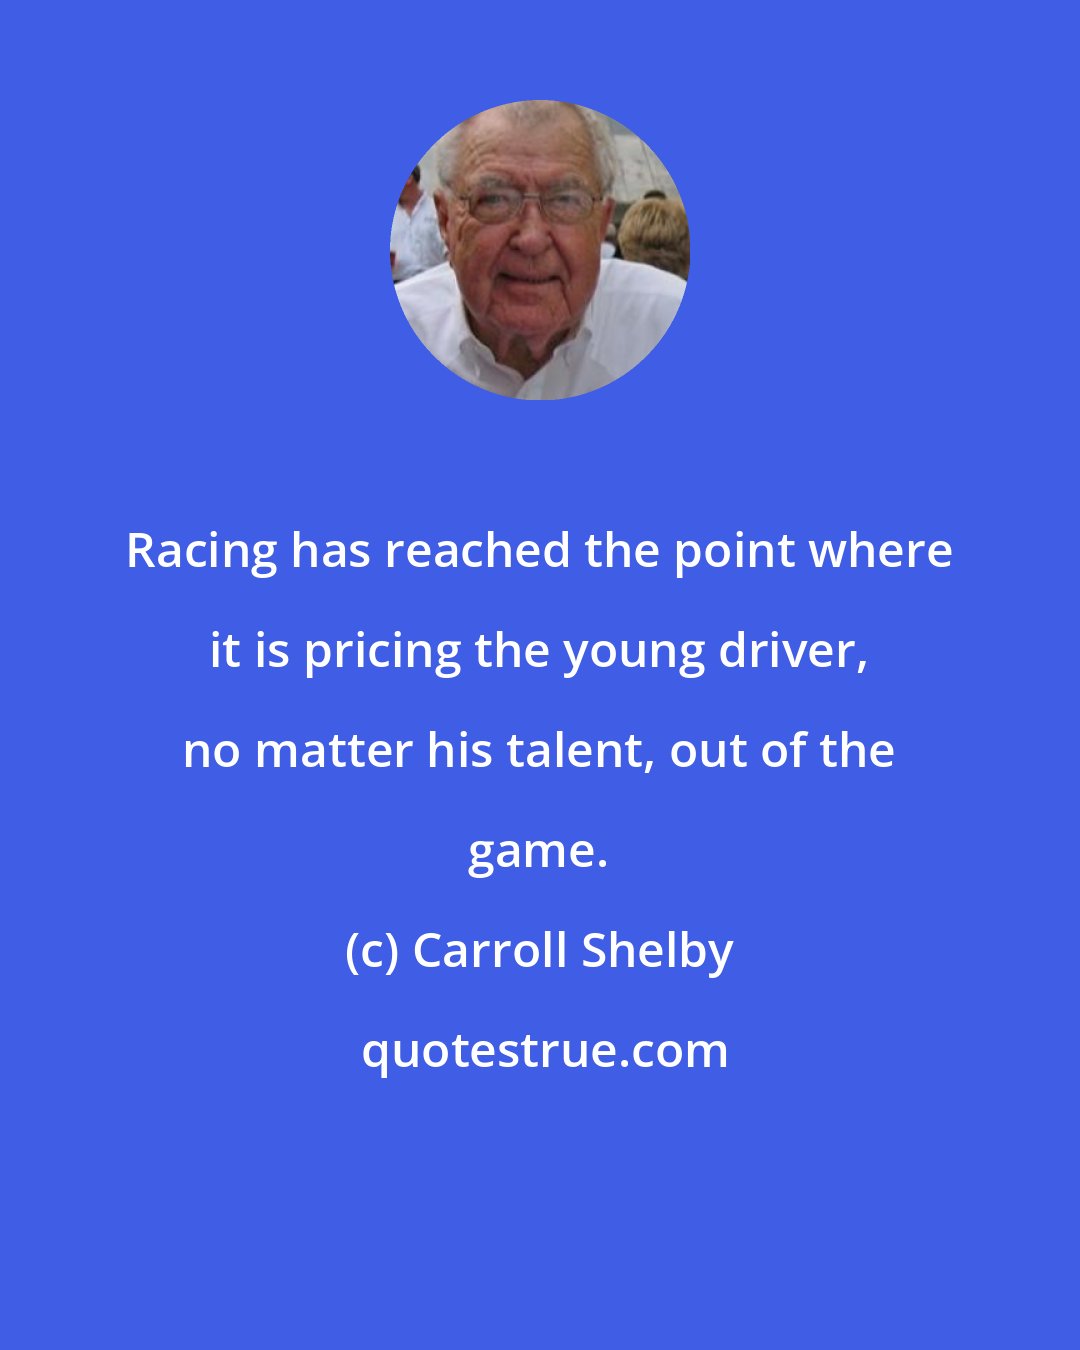 Carroll Shelby: Racing has reached the point where it is pricing the young driver, no matter his talent, out of the game.